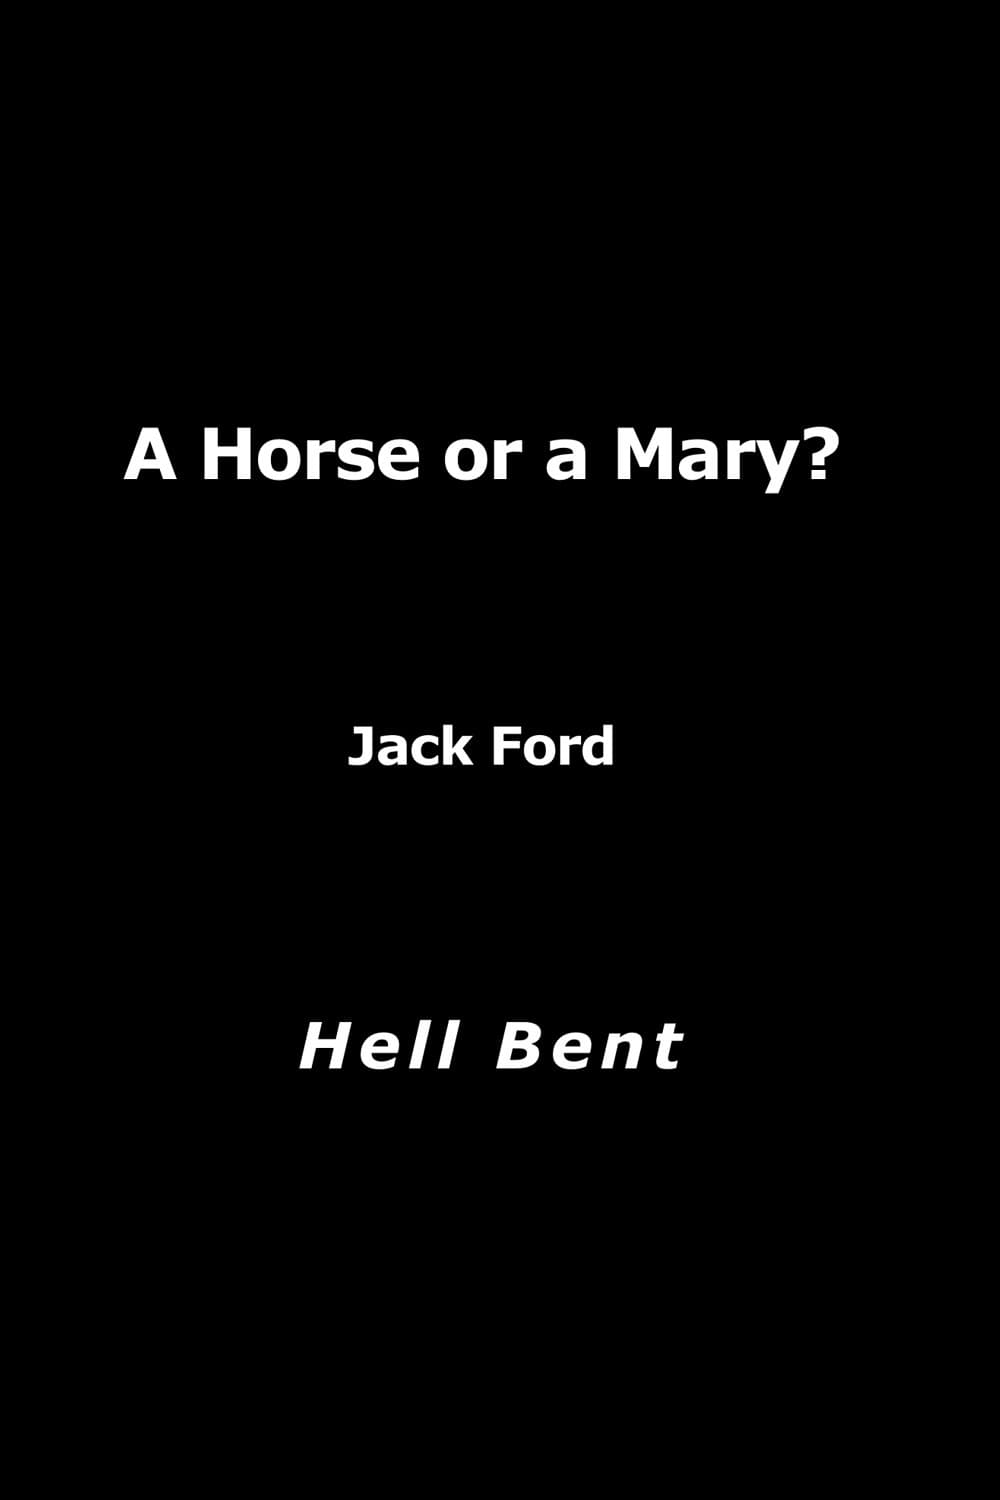 A Horse or a Mary: Tag Gallagher on 'Hell Bent'